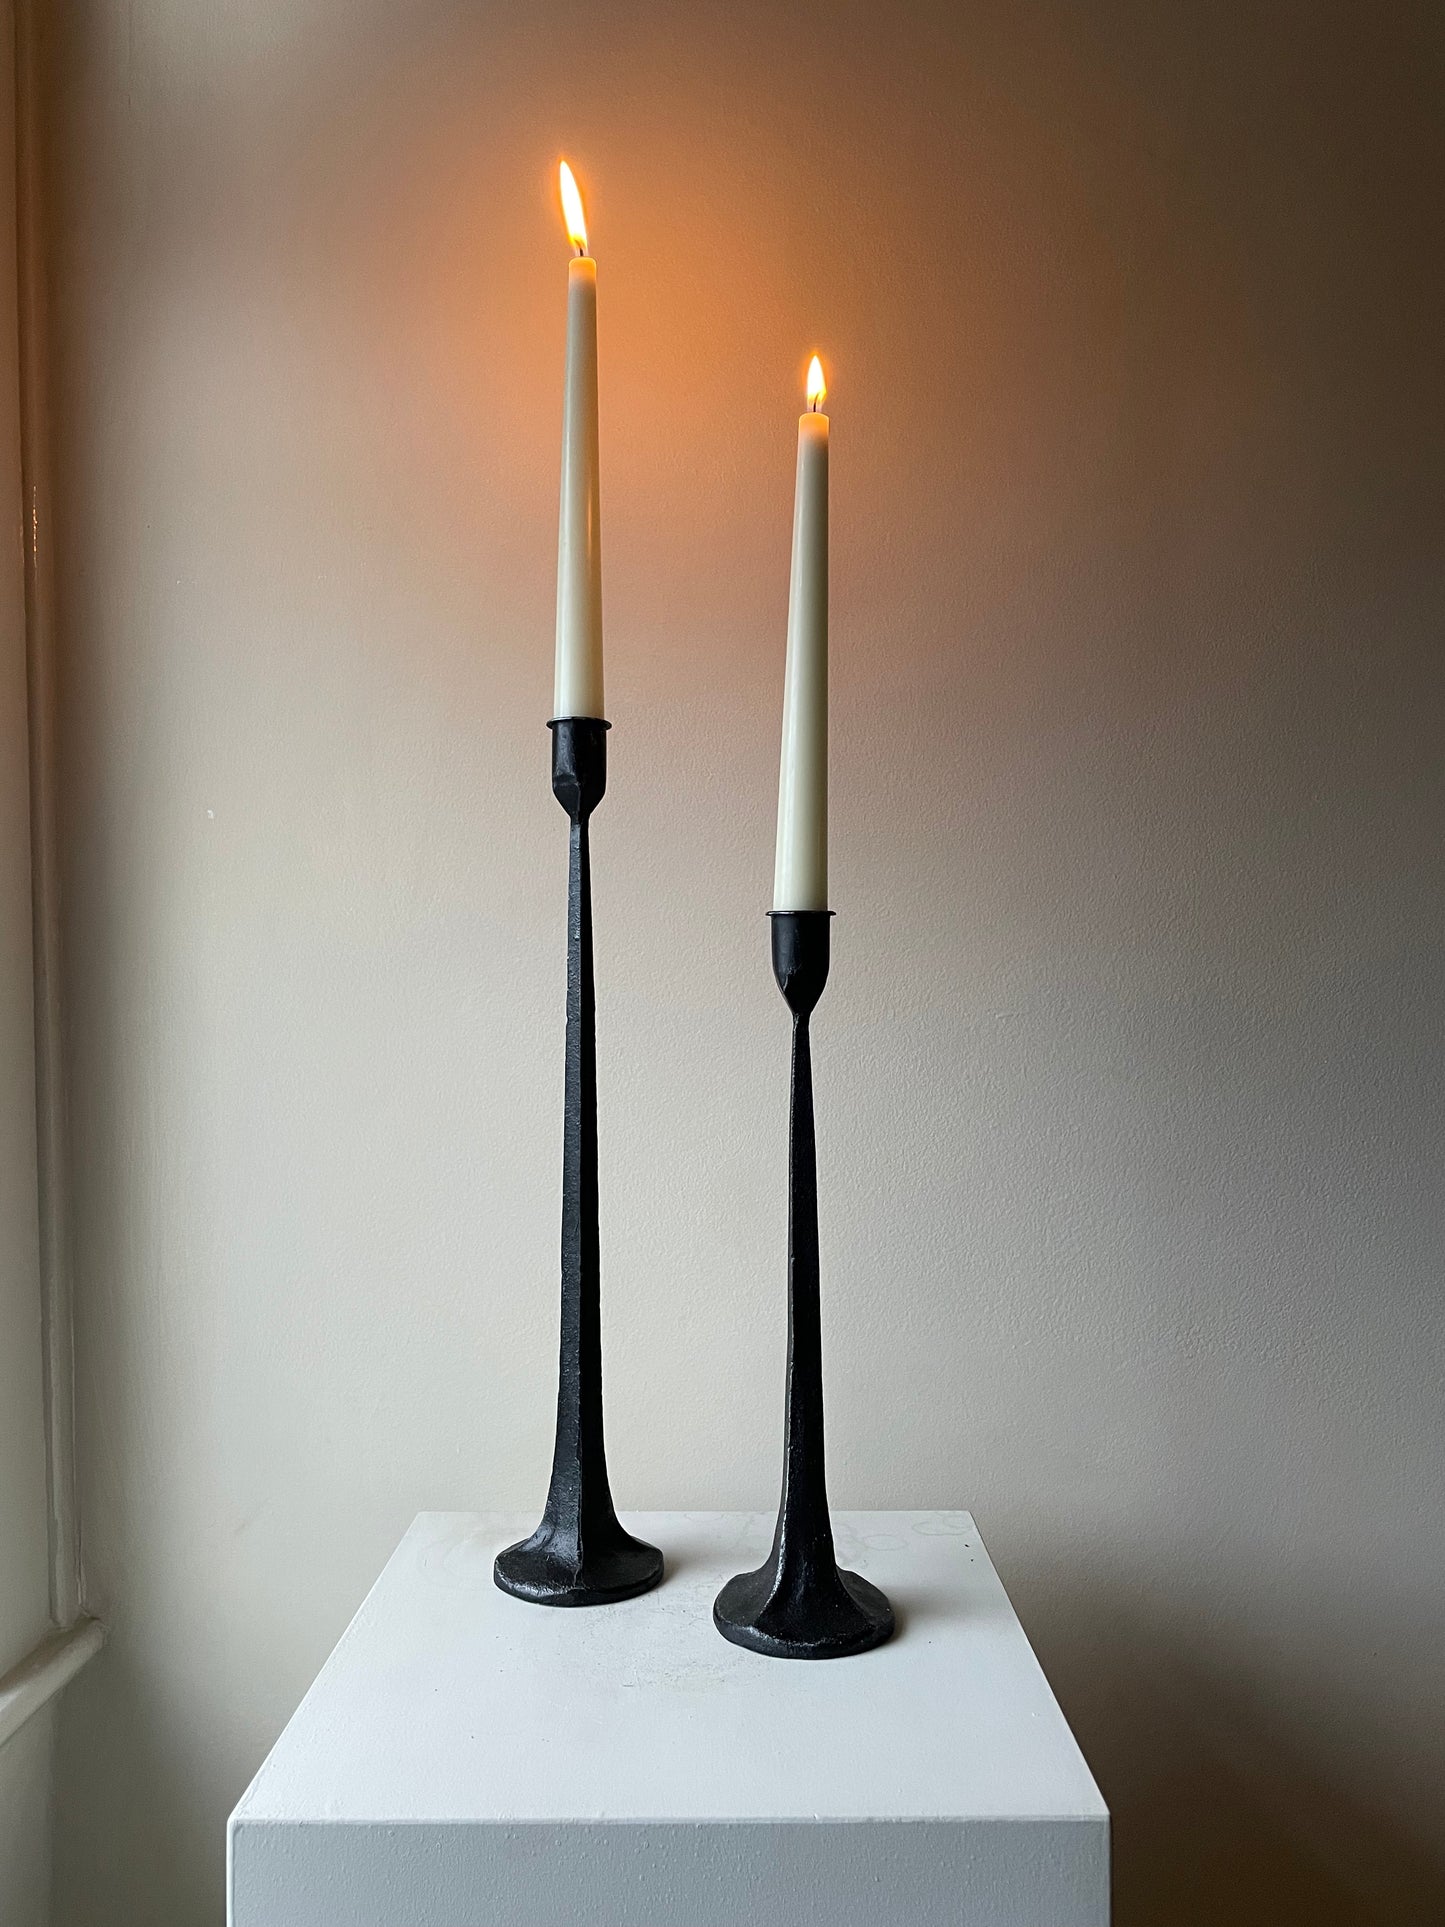 Wrought Iron Taper Candlestick Holder